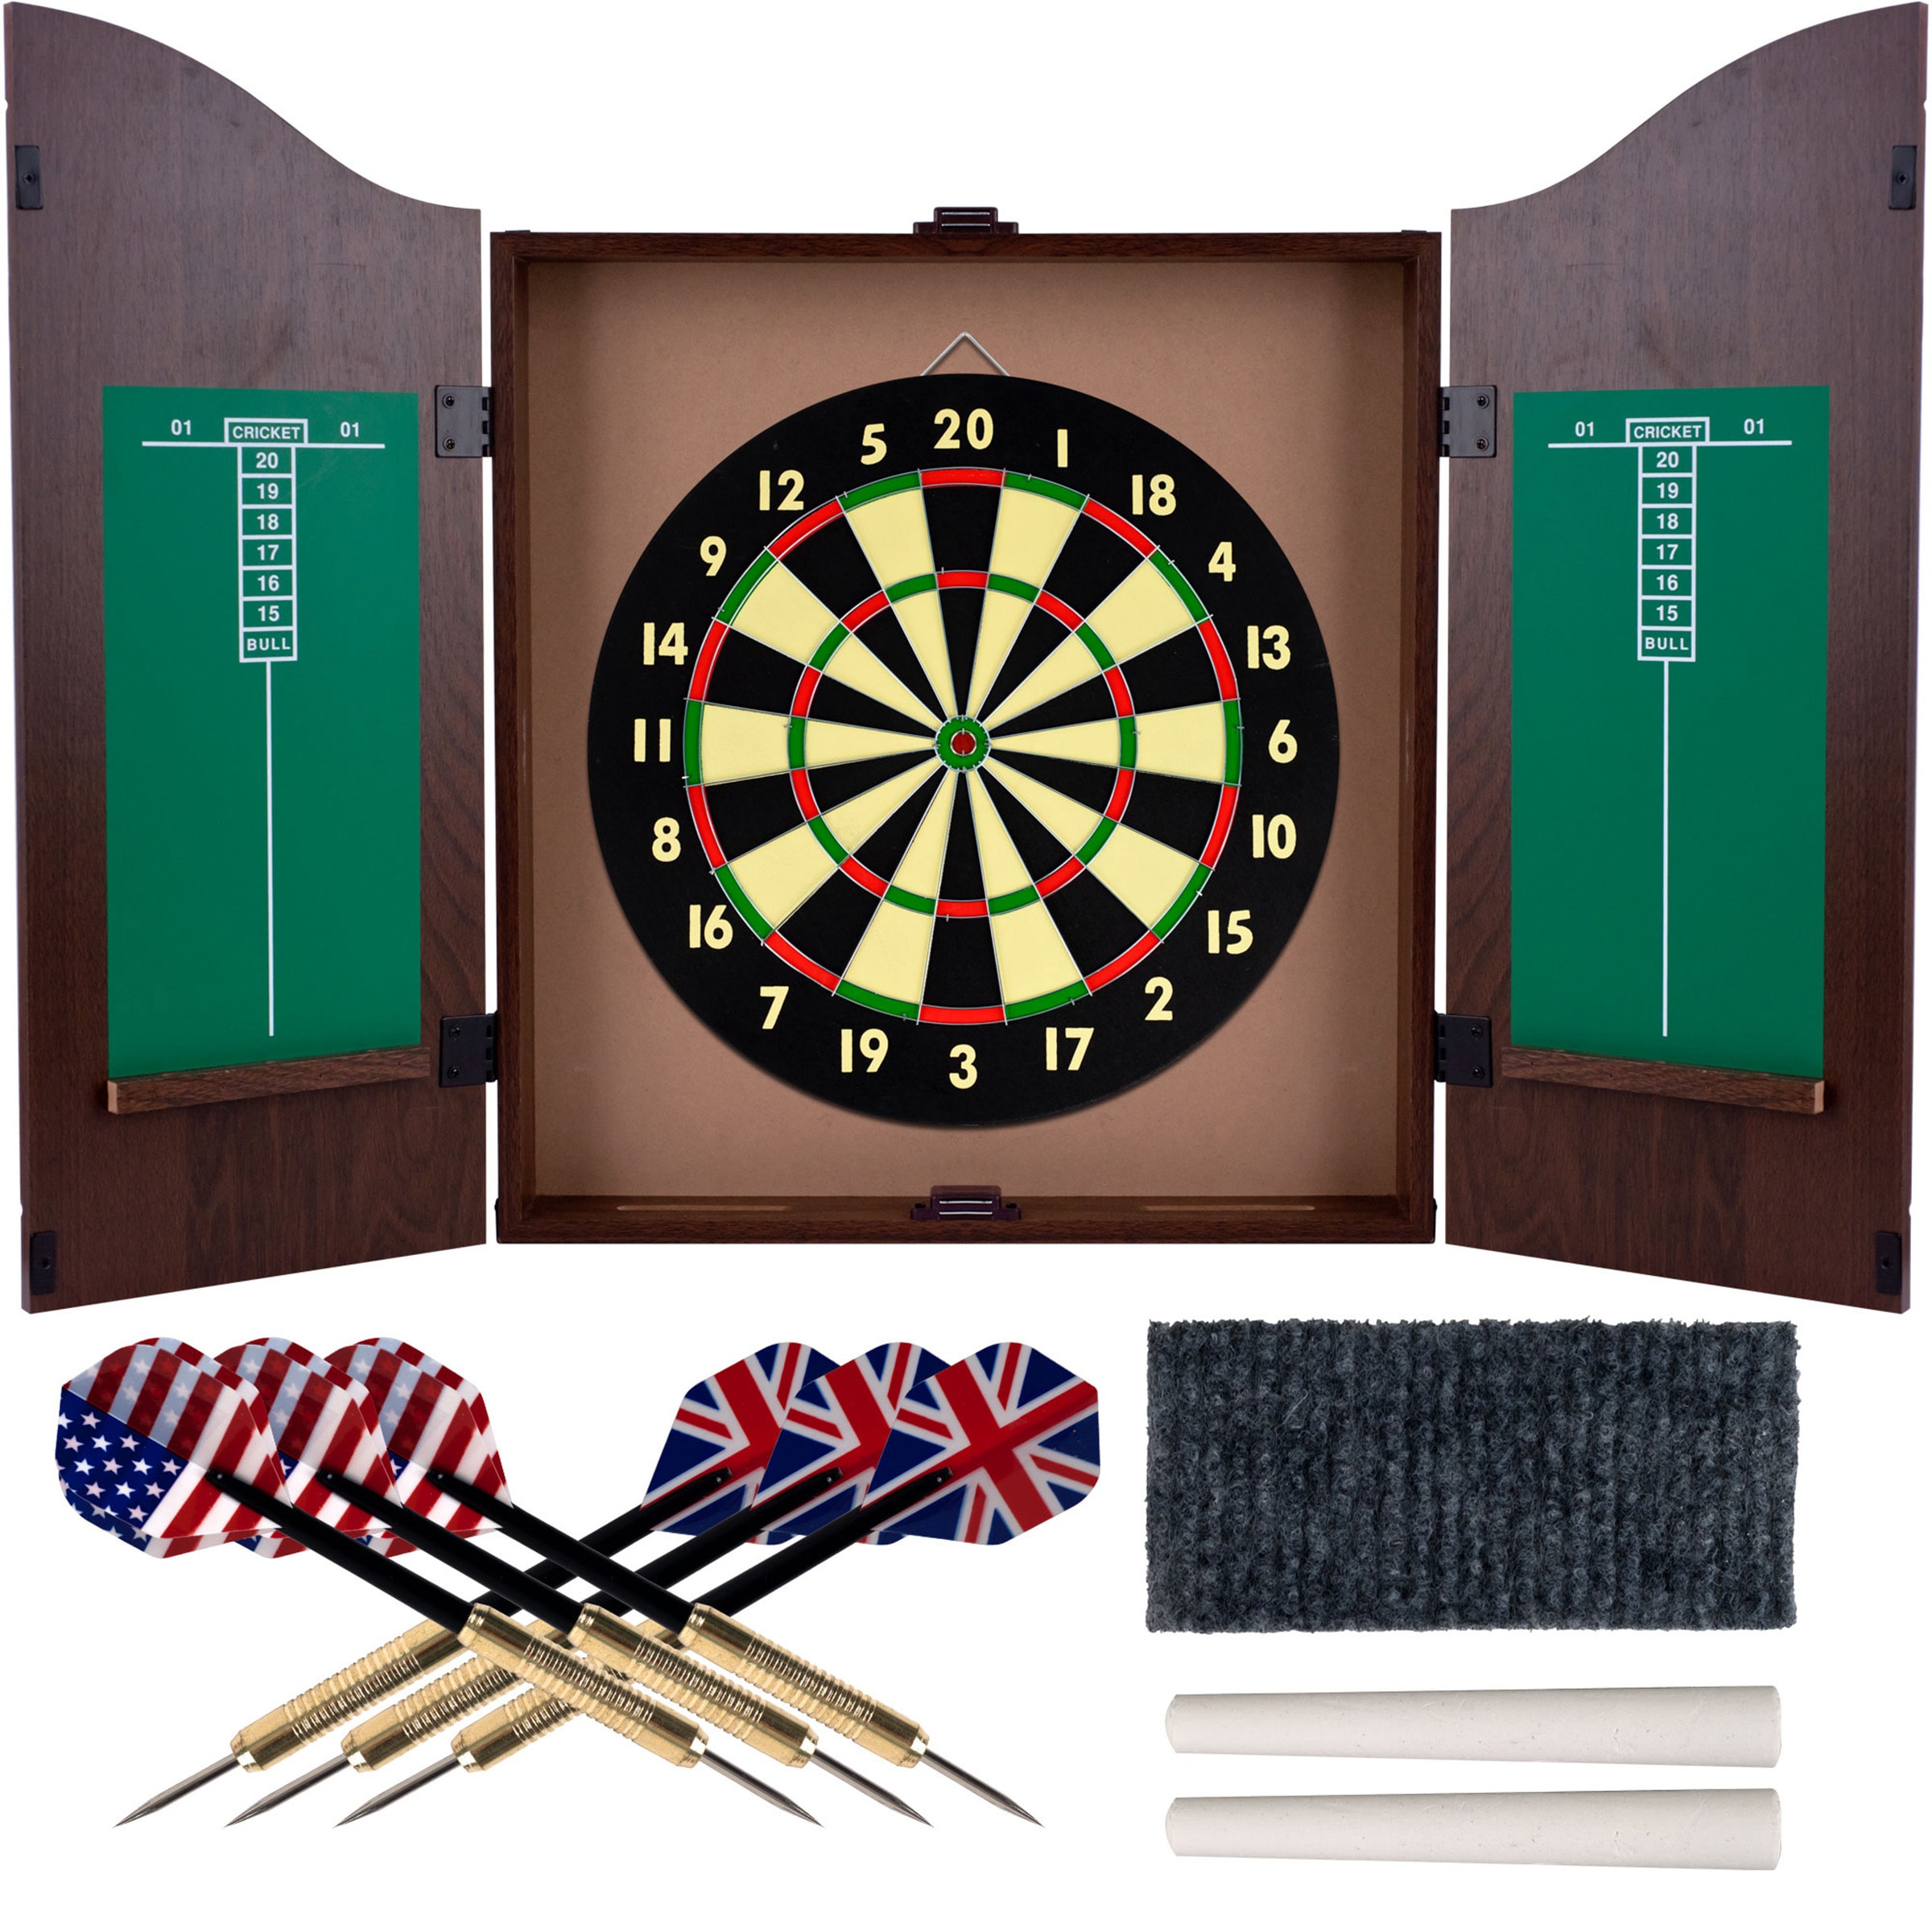 Paper Dartboard 2 Sided with 2 Games 12 Steeltip Darts Include 15 inch 